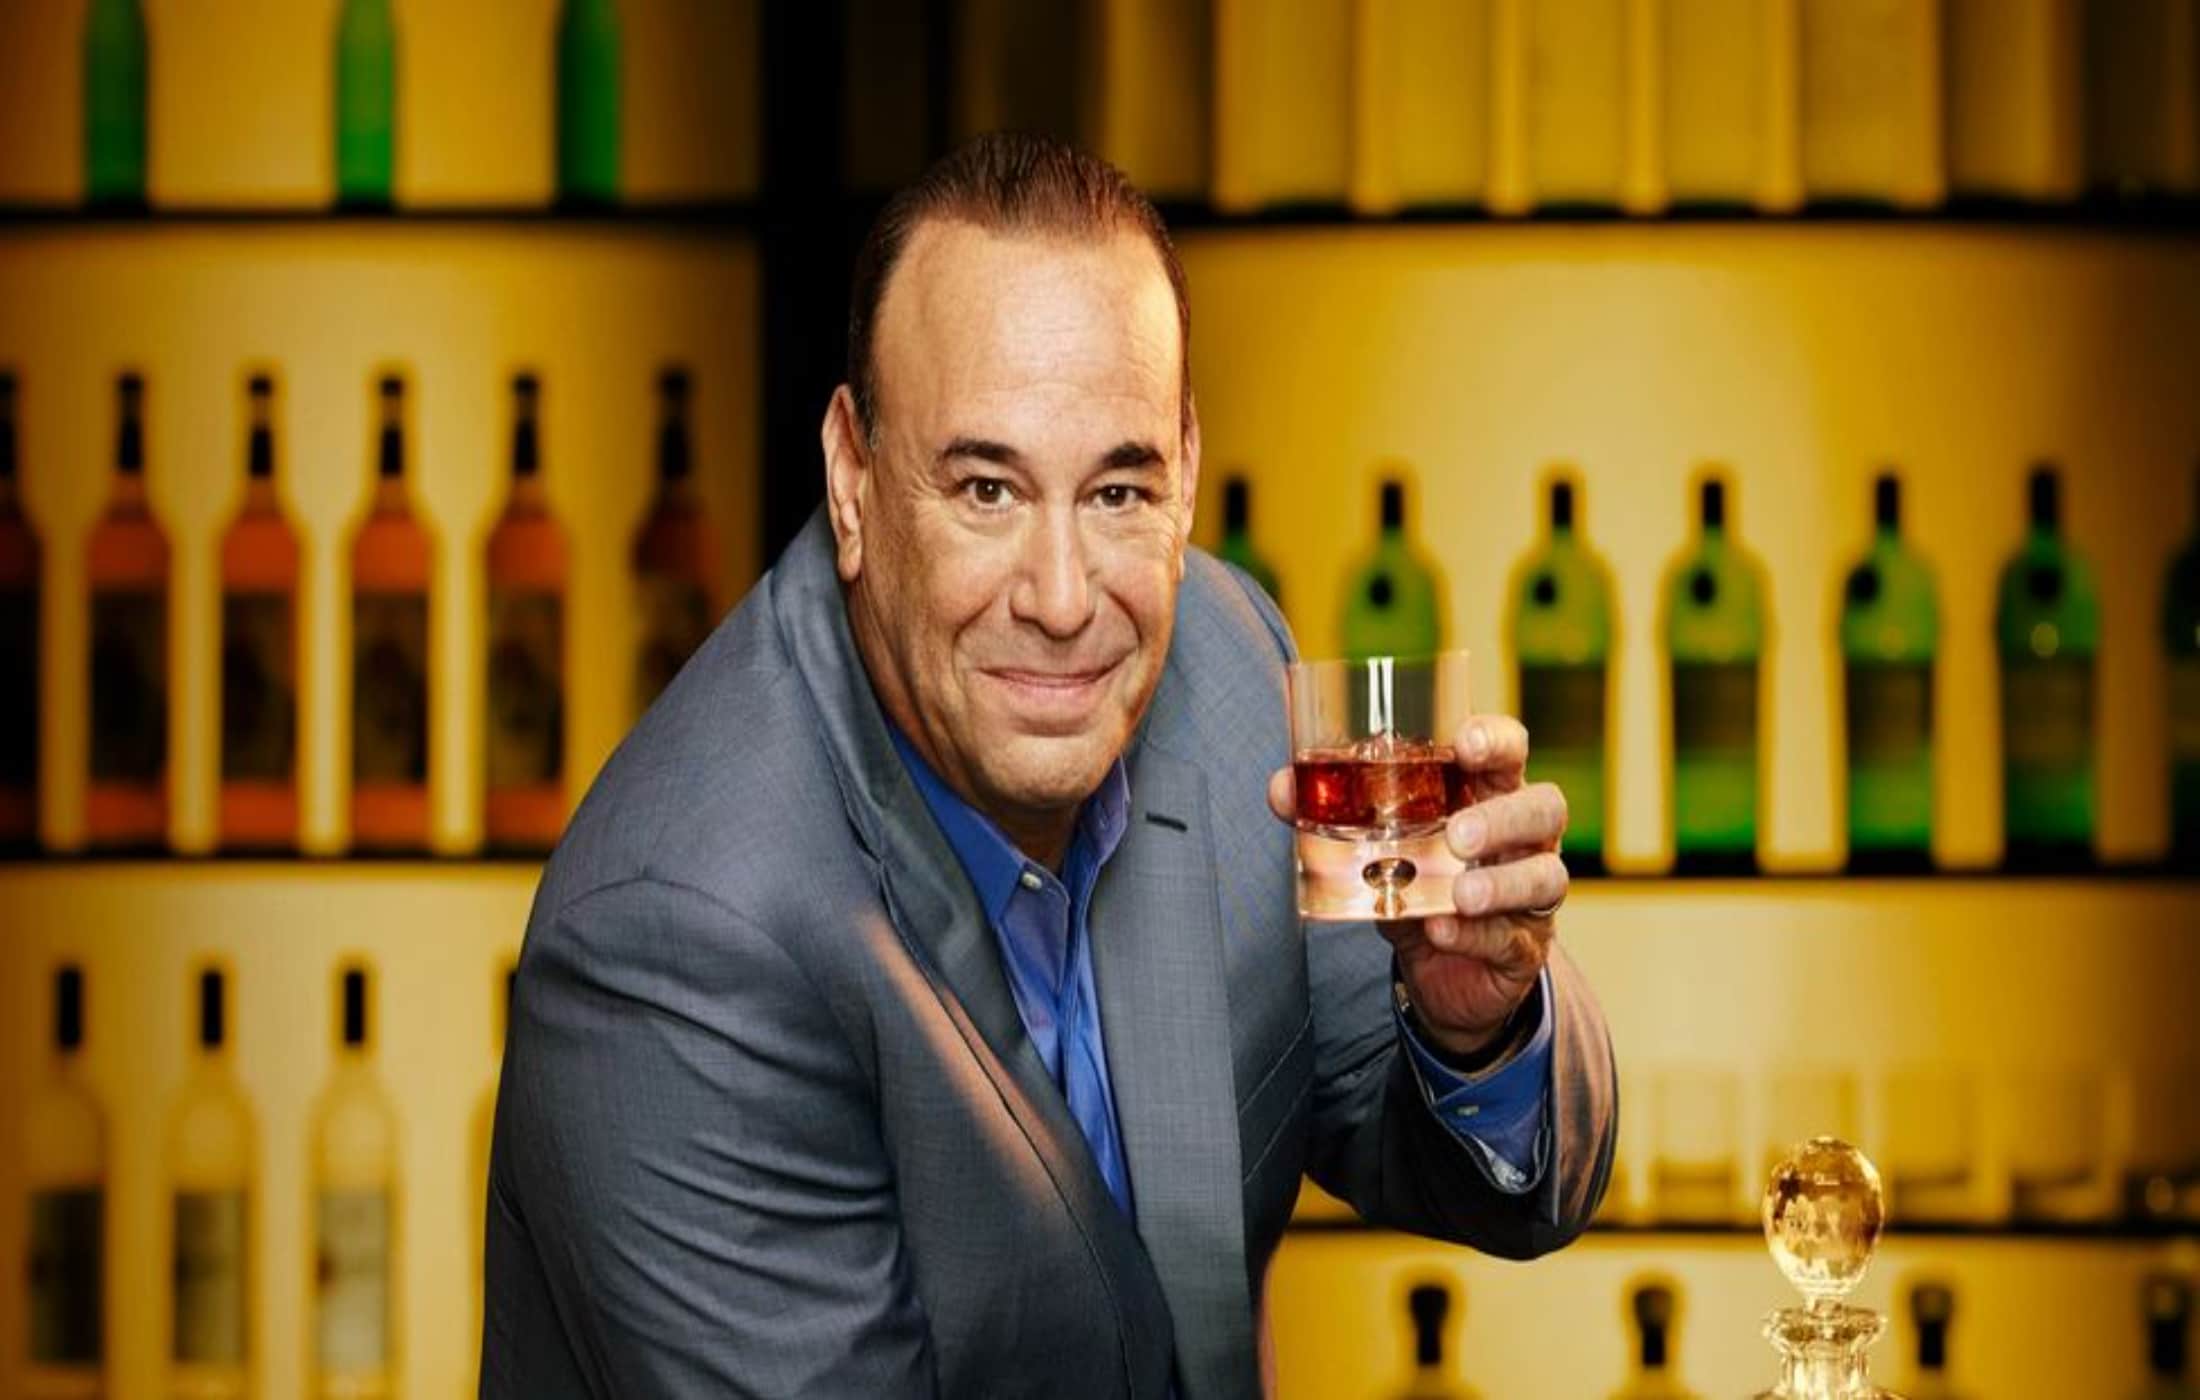 Jon Taffer Net Worth Biography, Age, Height, Awards, And More